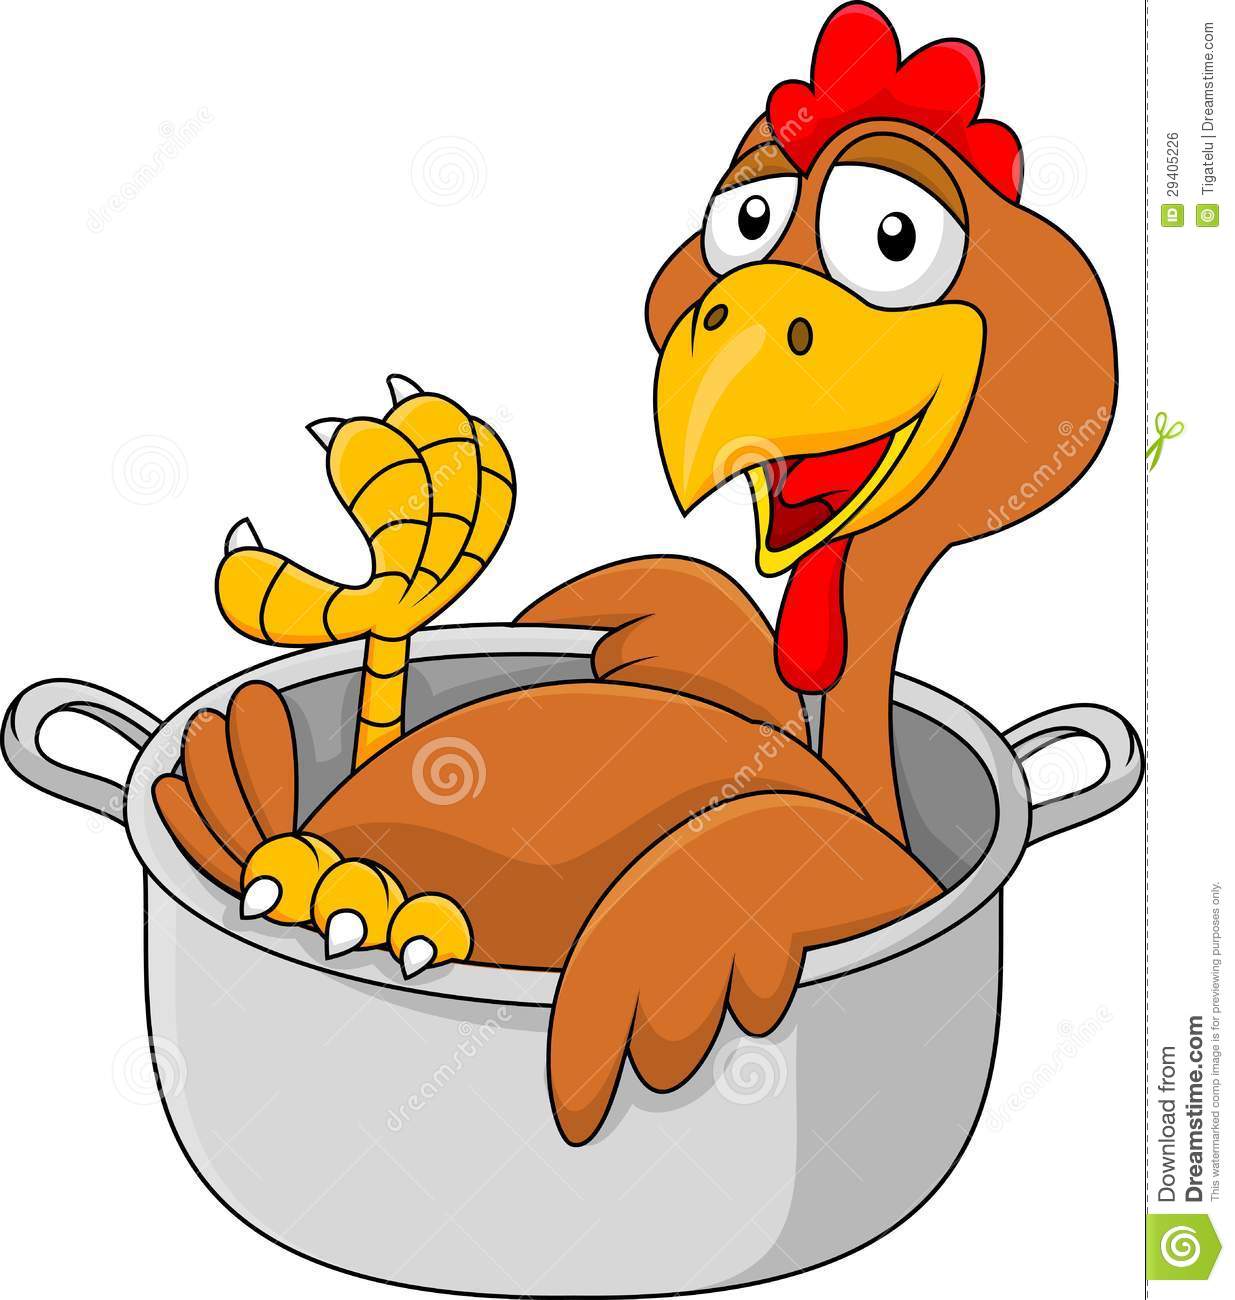 Chicken Cartoon In The Saucepan Royalty Free Stock Image   Image